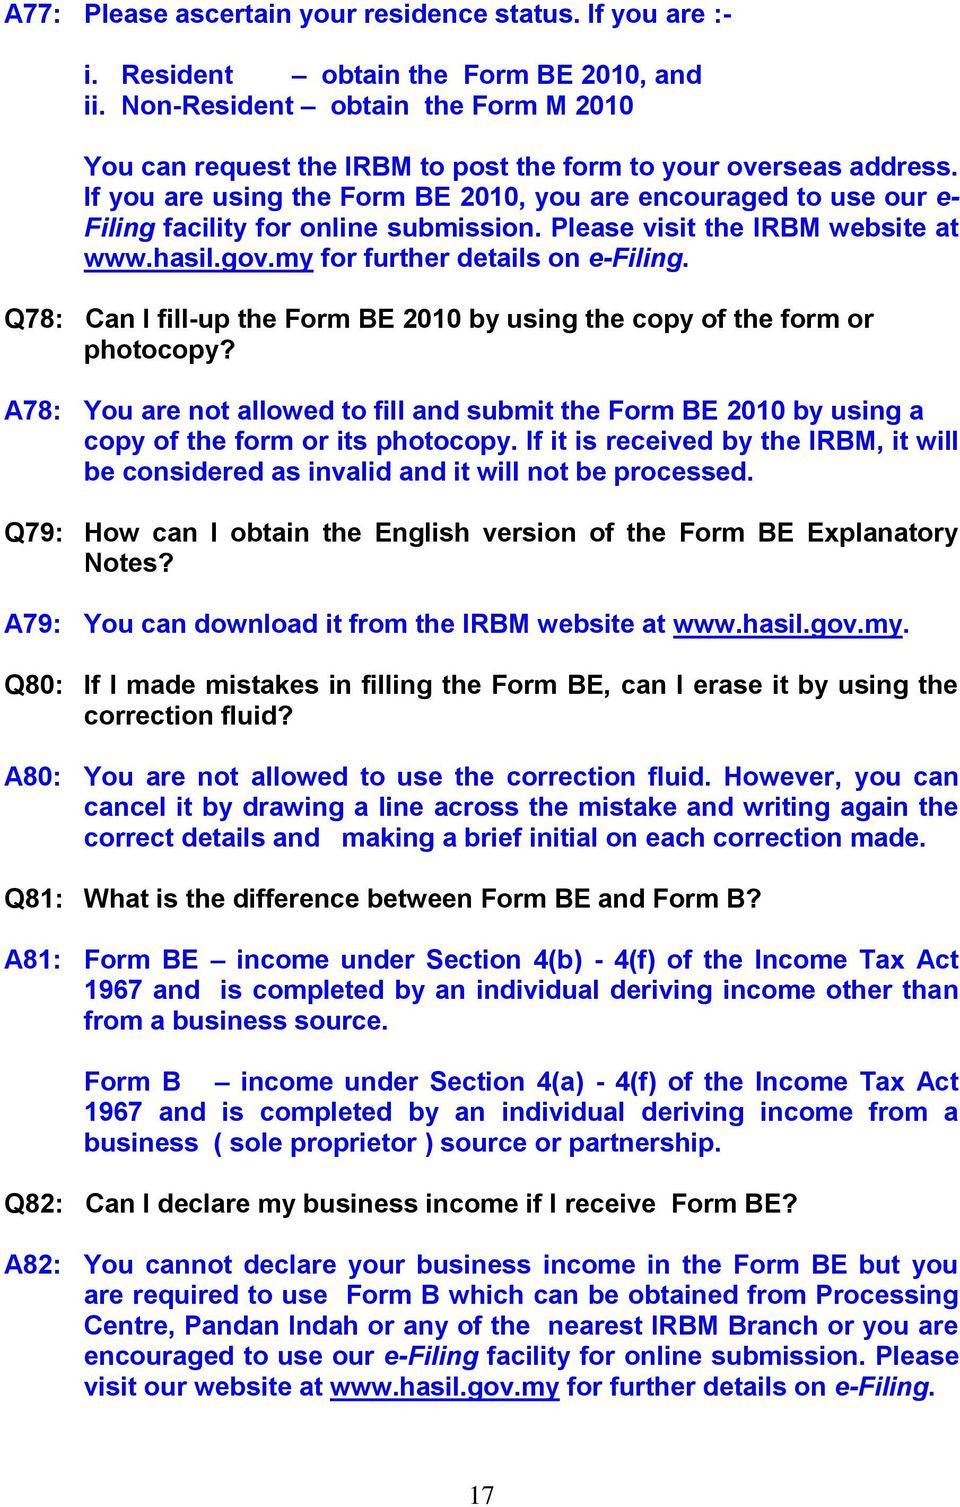 If you are using the Form BE 2010, you are encouraged to use our e- Filing facility for online submission. Please visit the IRBM website at www.hasil.gov.my for further details on e-filing.